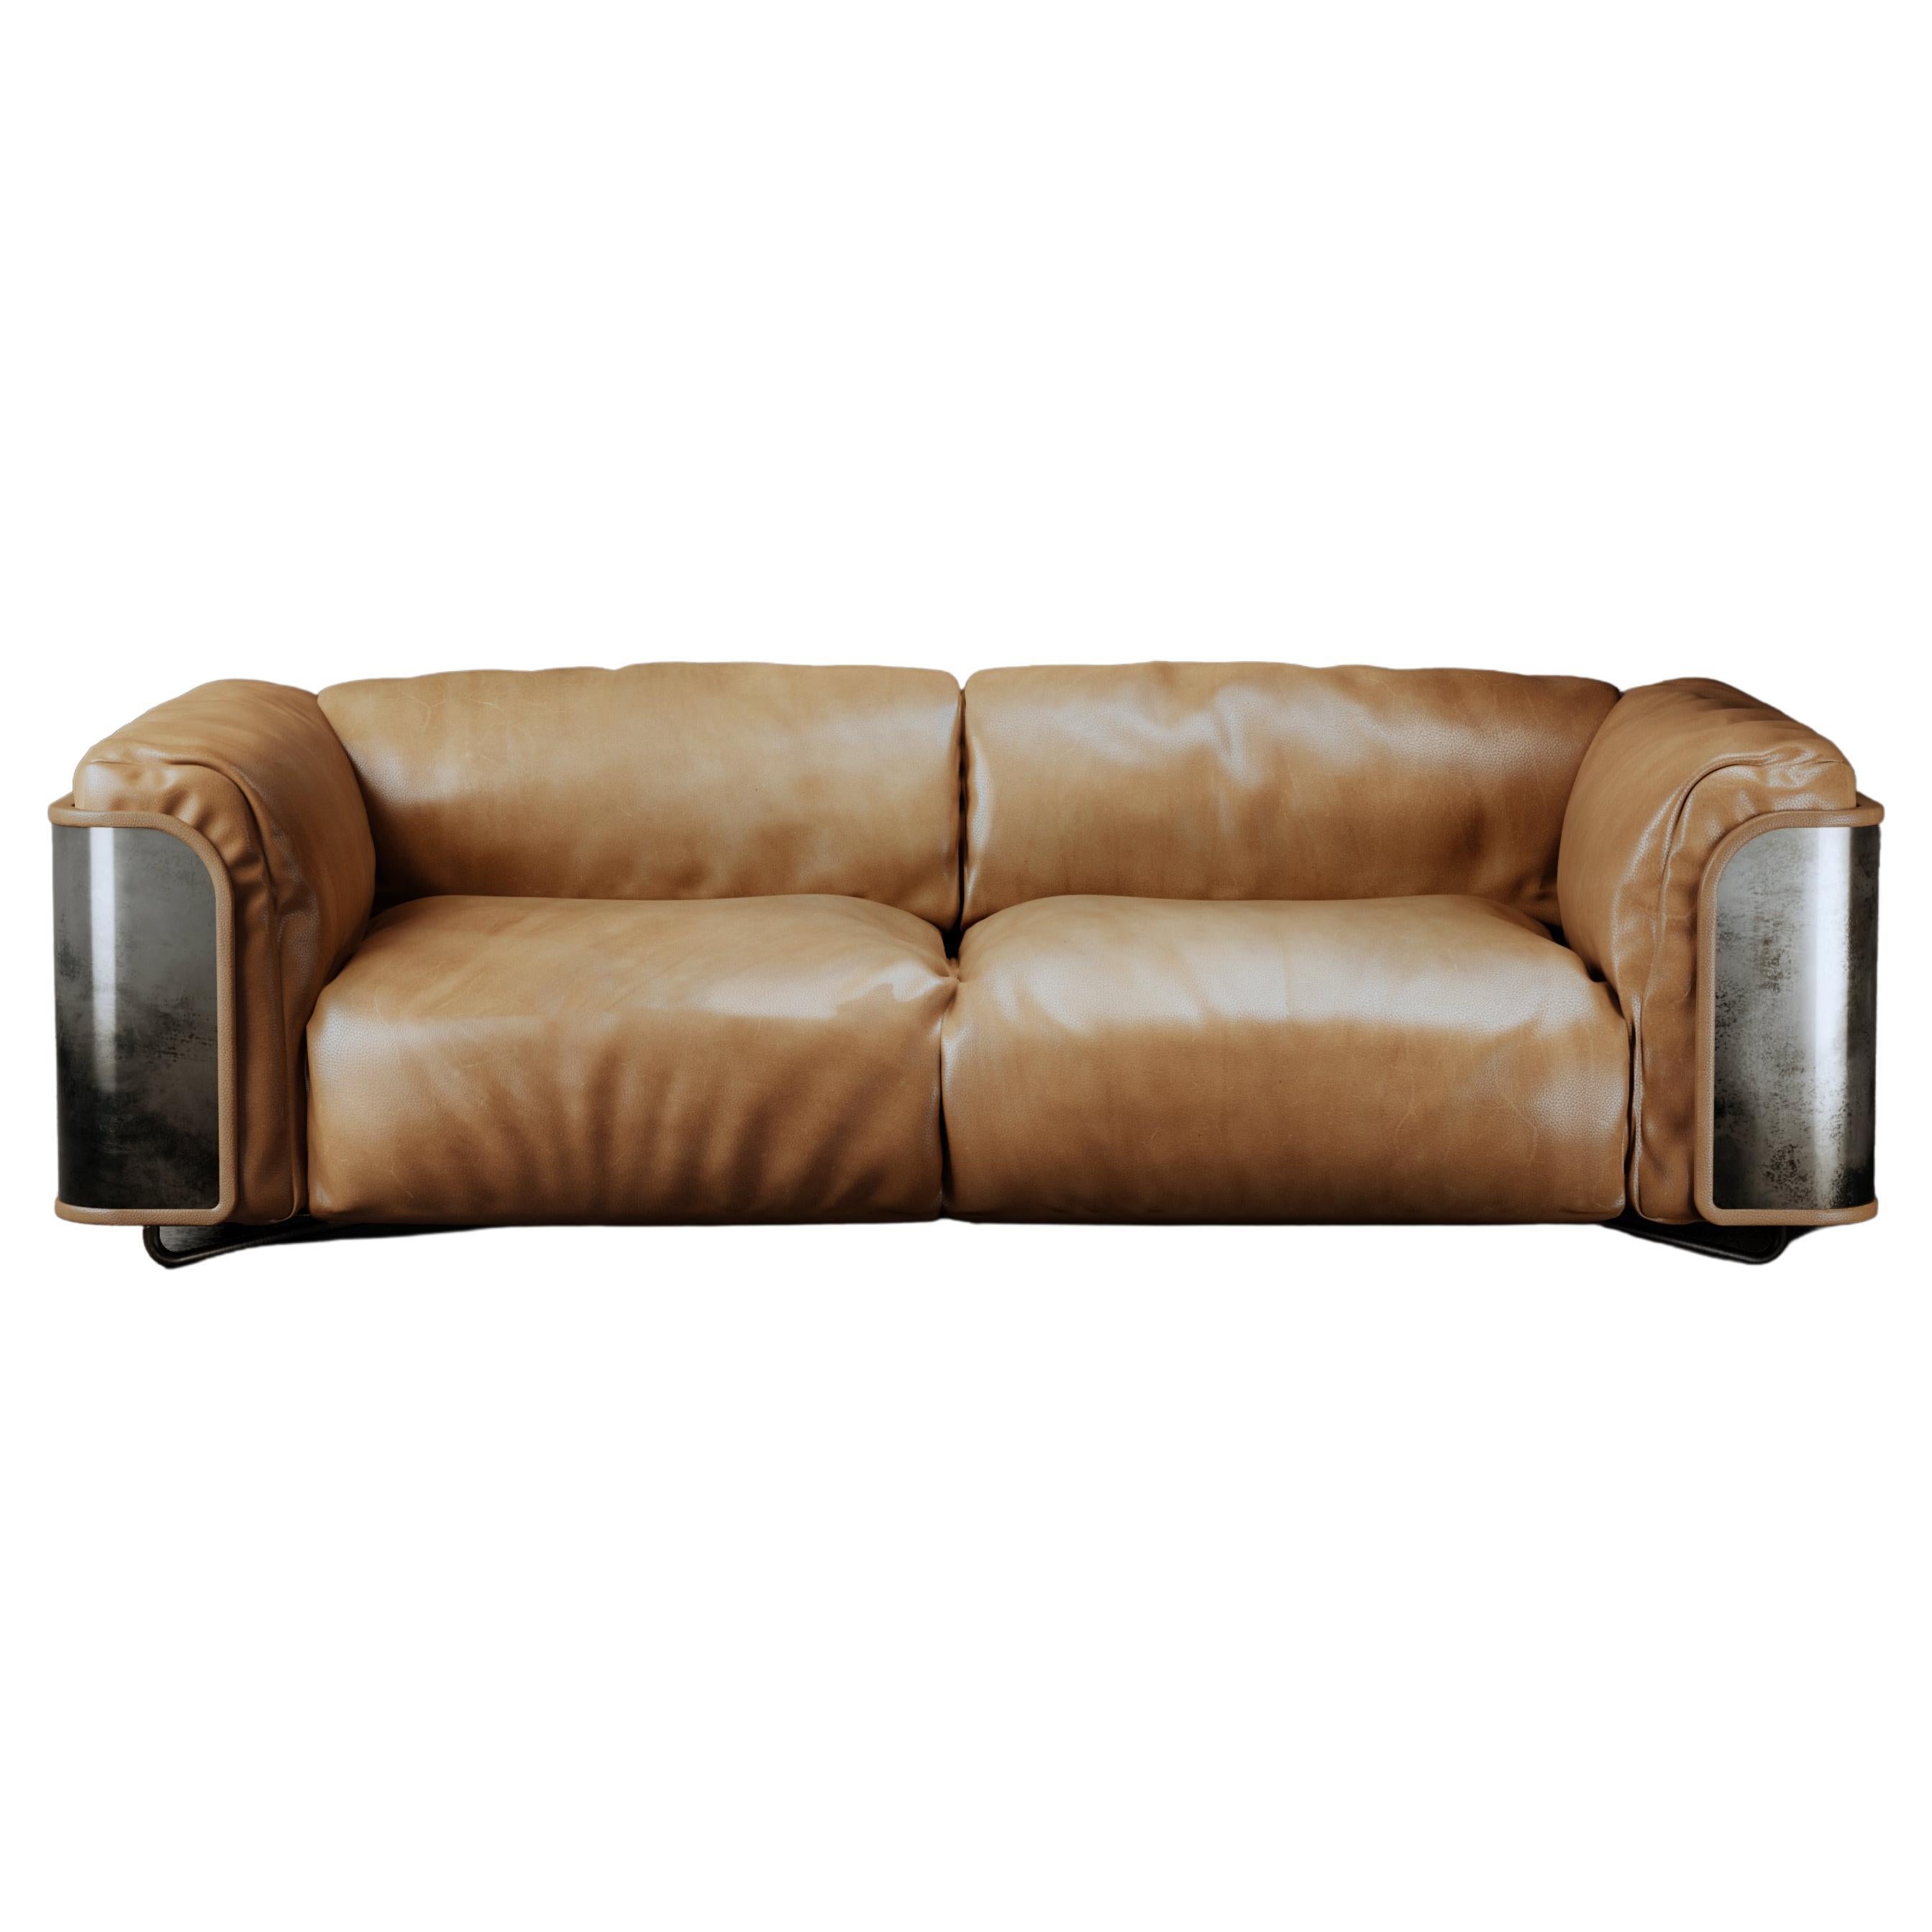 Saint-Germain 2-Seat Sofa in Sella Touch Leather and raw Silver